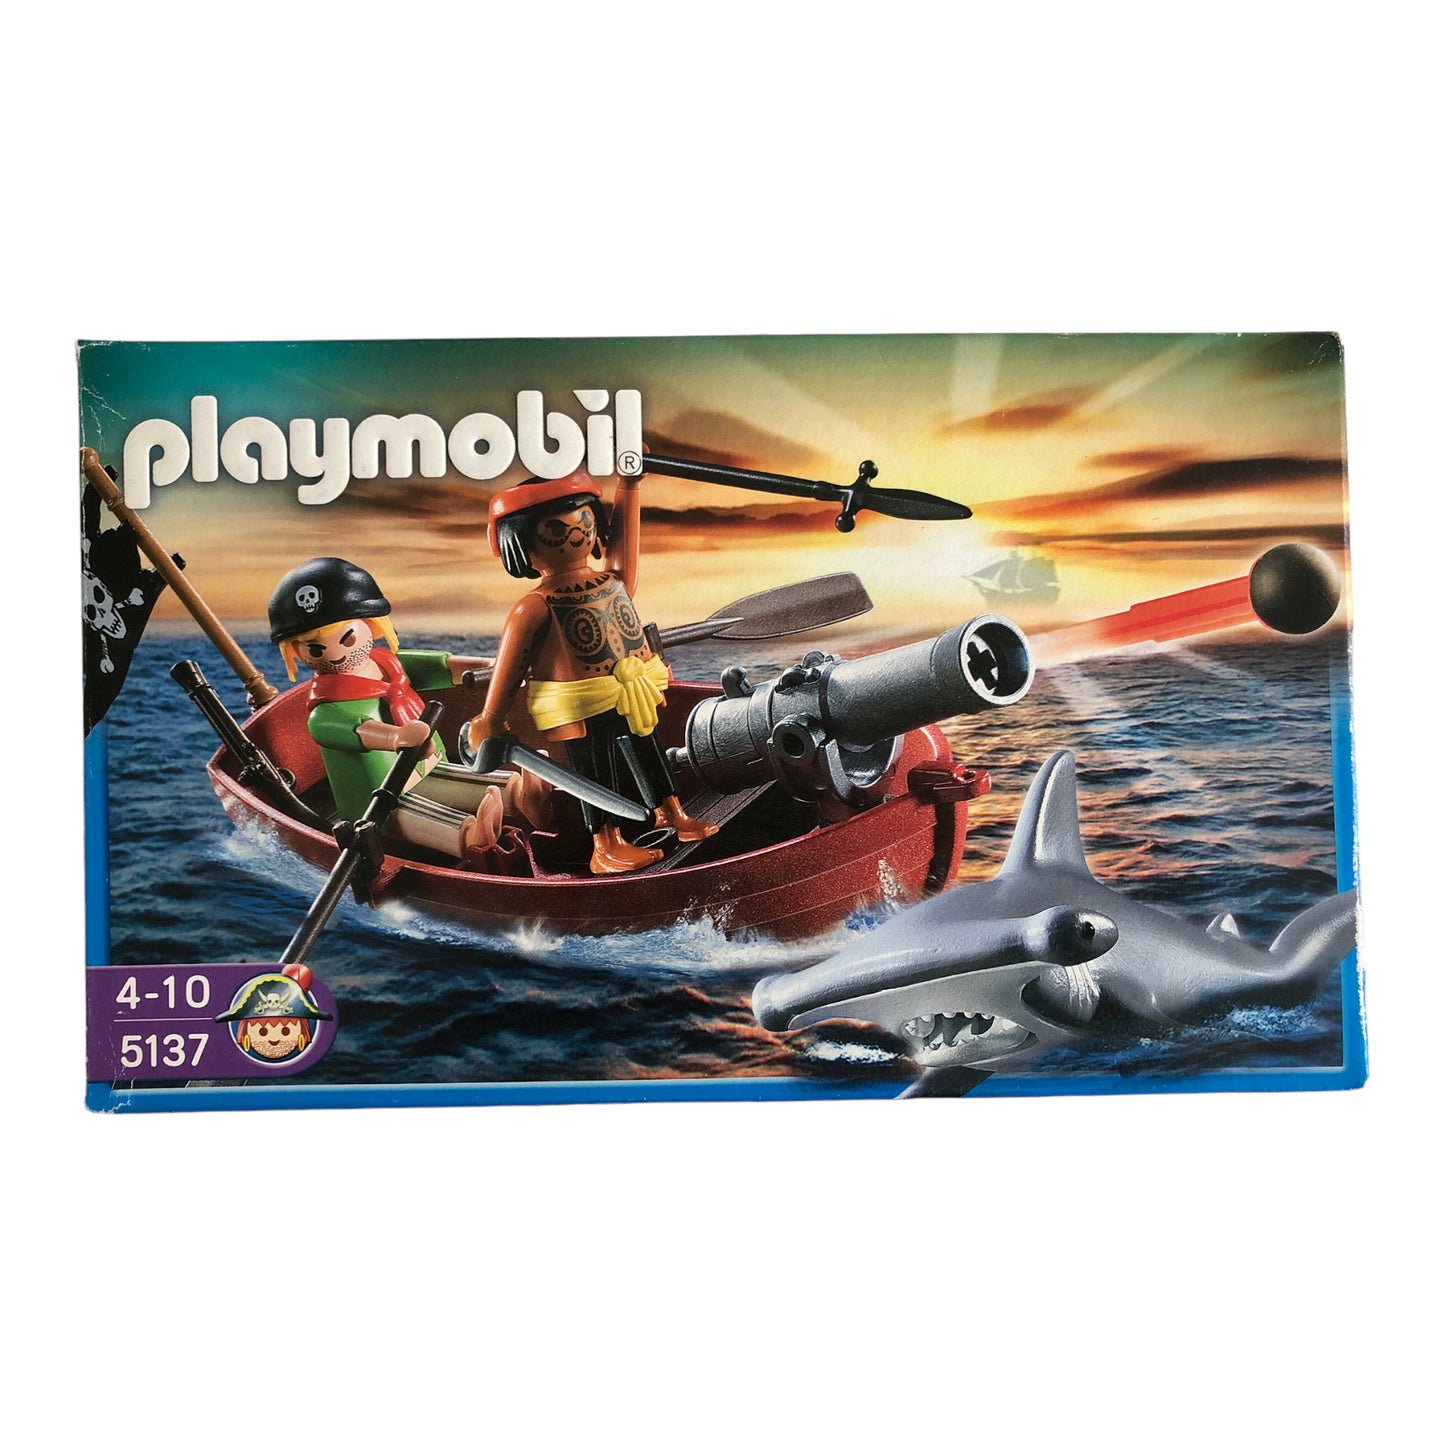 Playmobil - Pirate boat with hammerhead shark